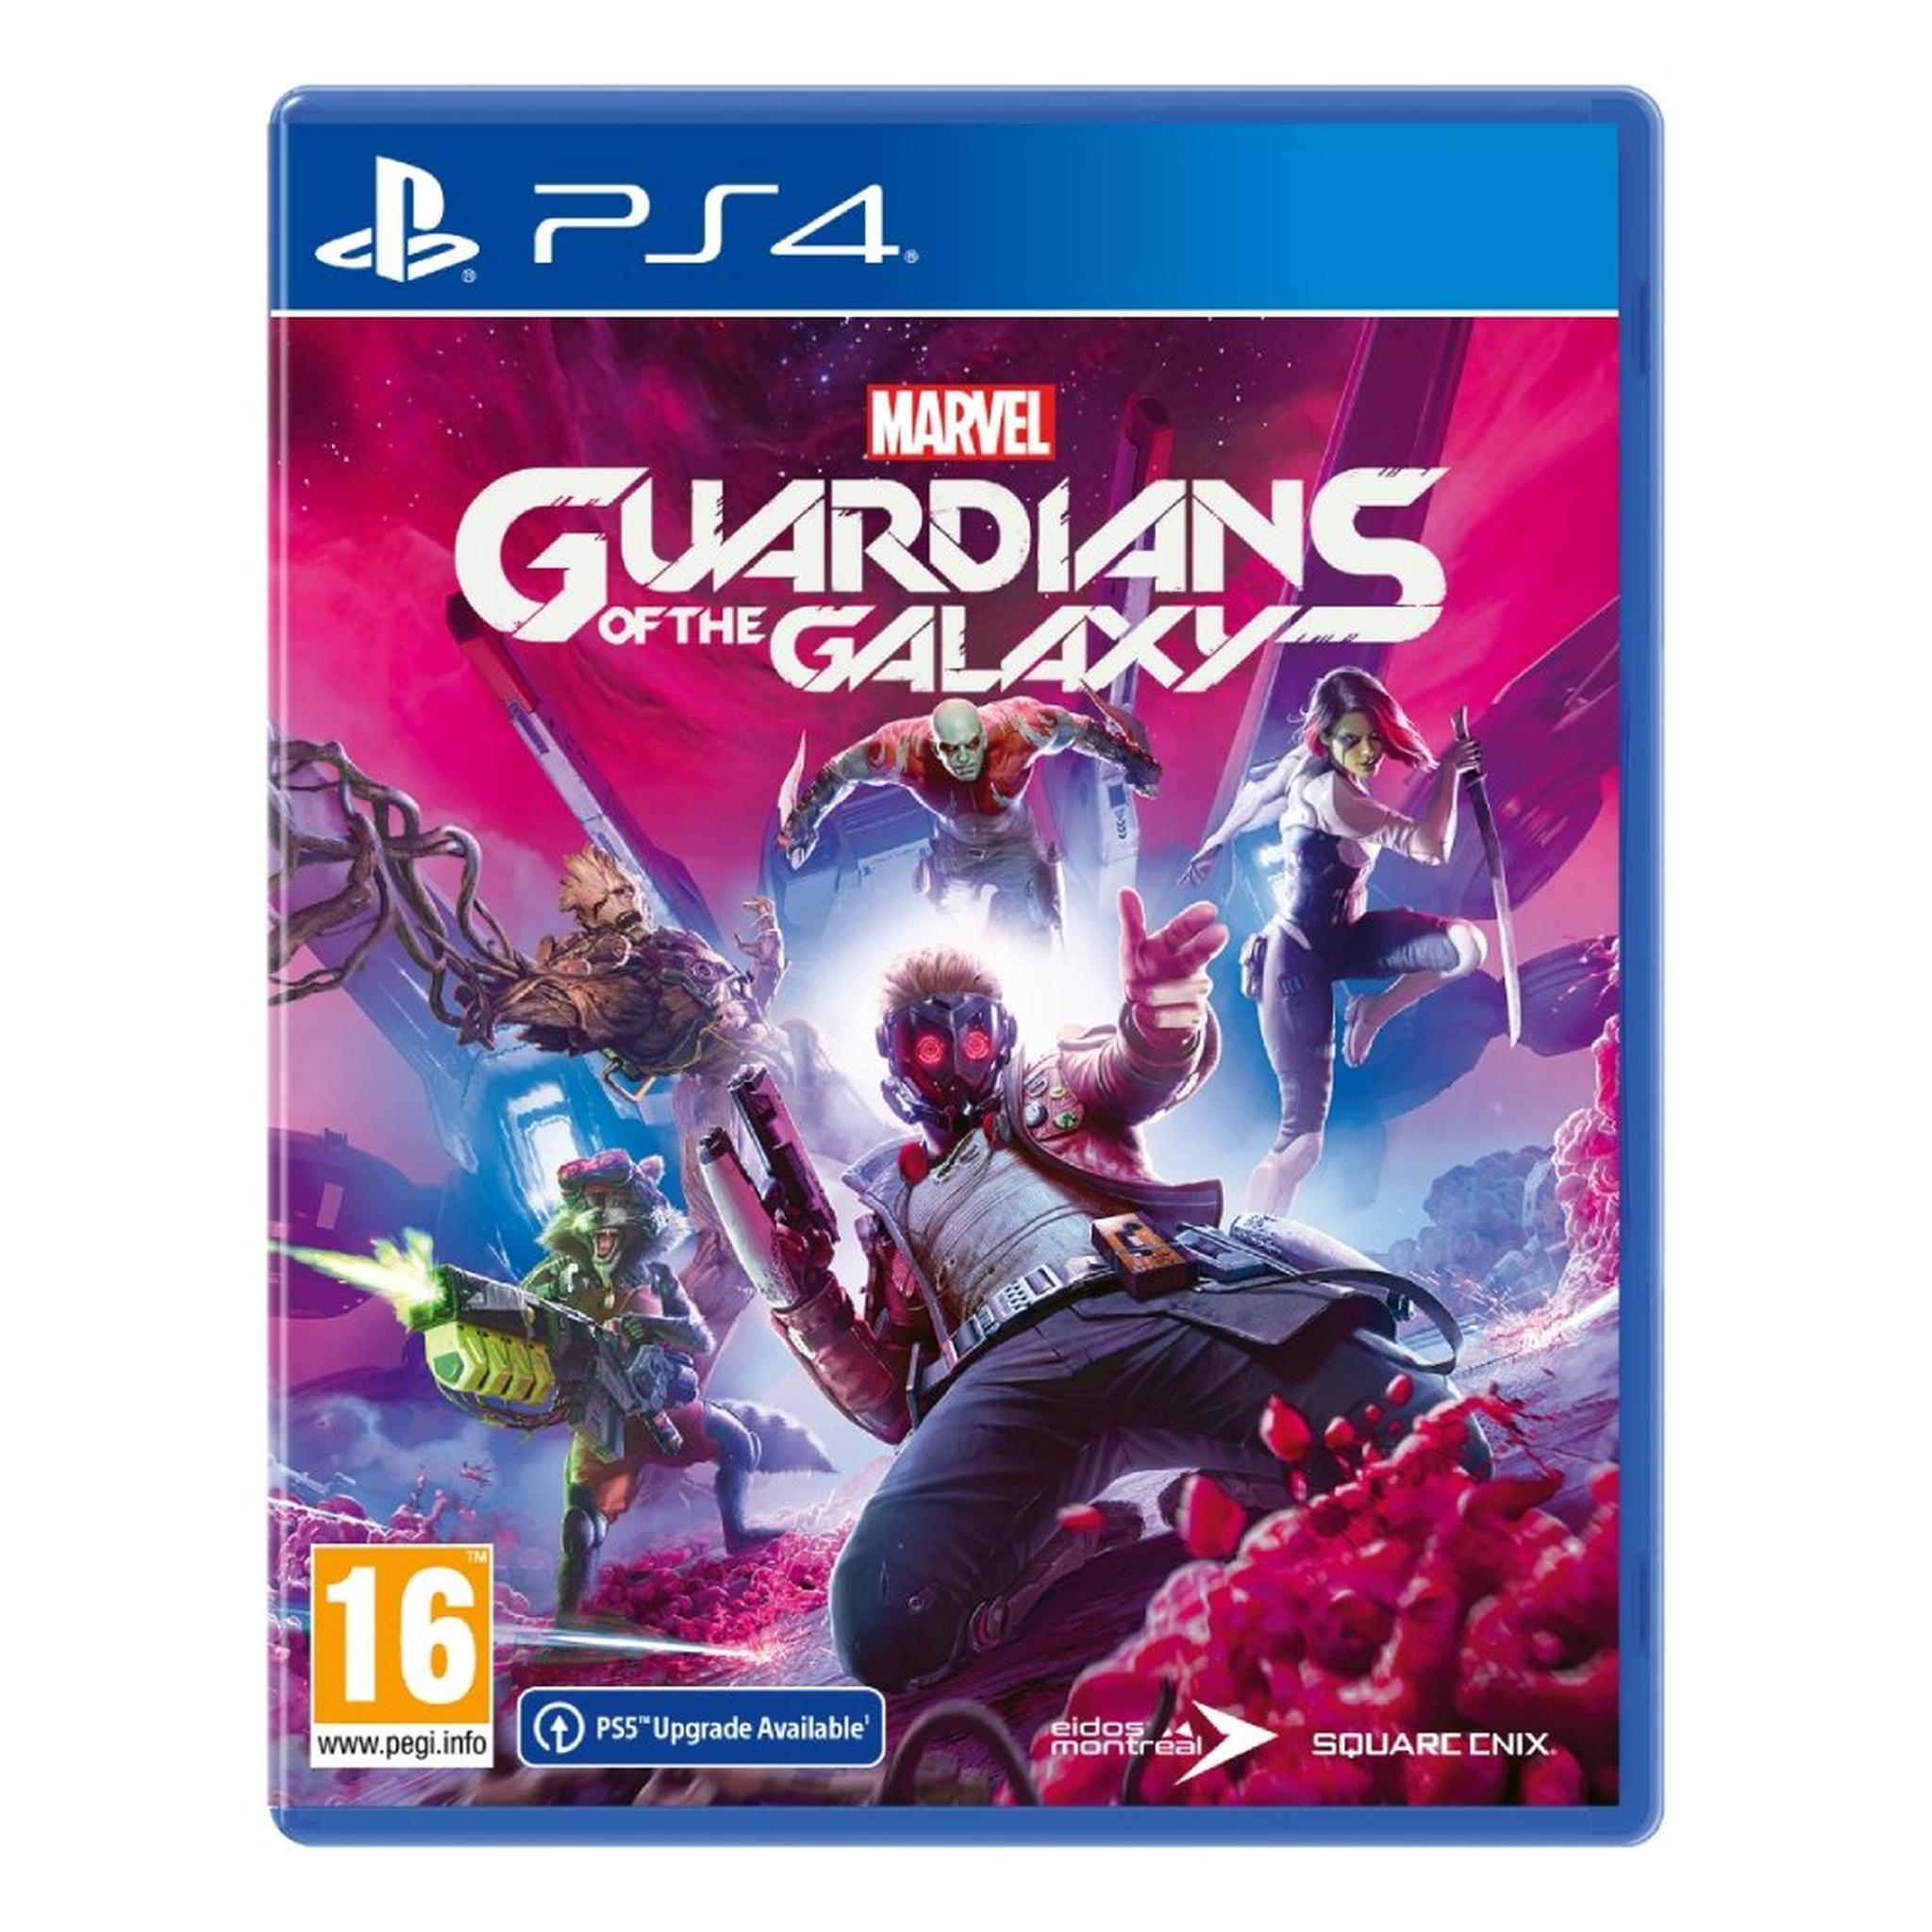 Marvel's Guardians of the Galaxy - Standard Edition - Day 1 - PS4 Game